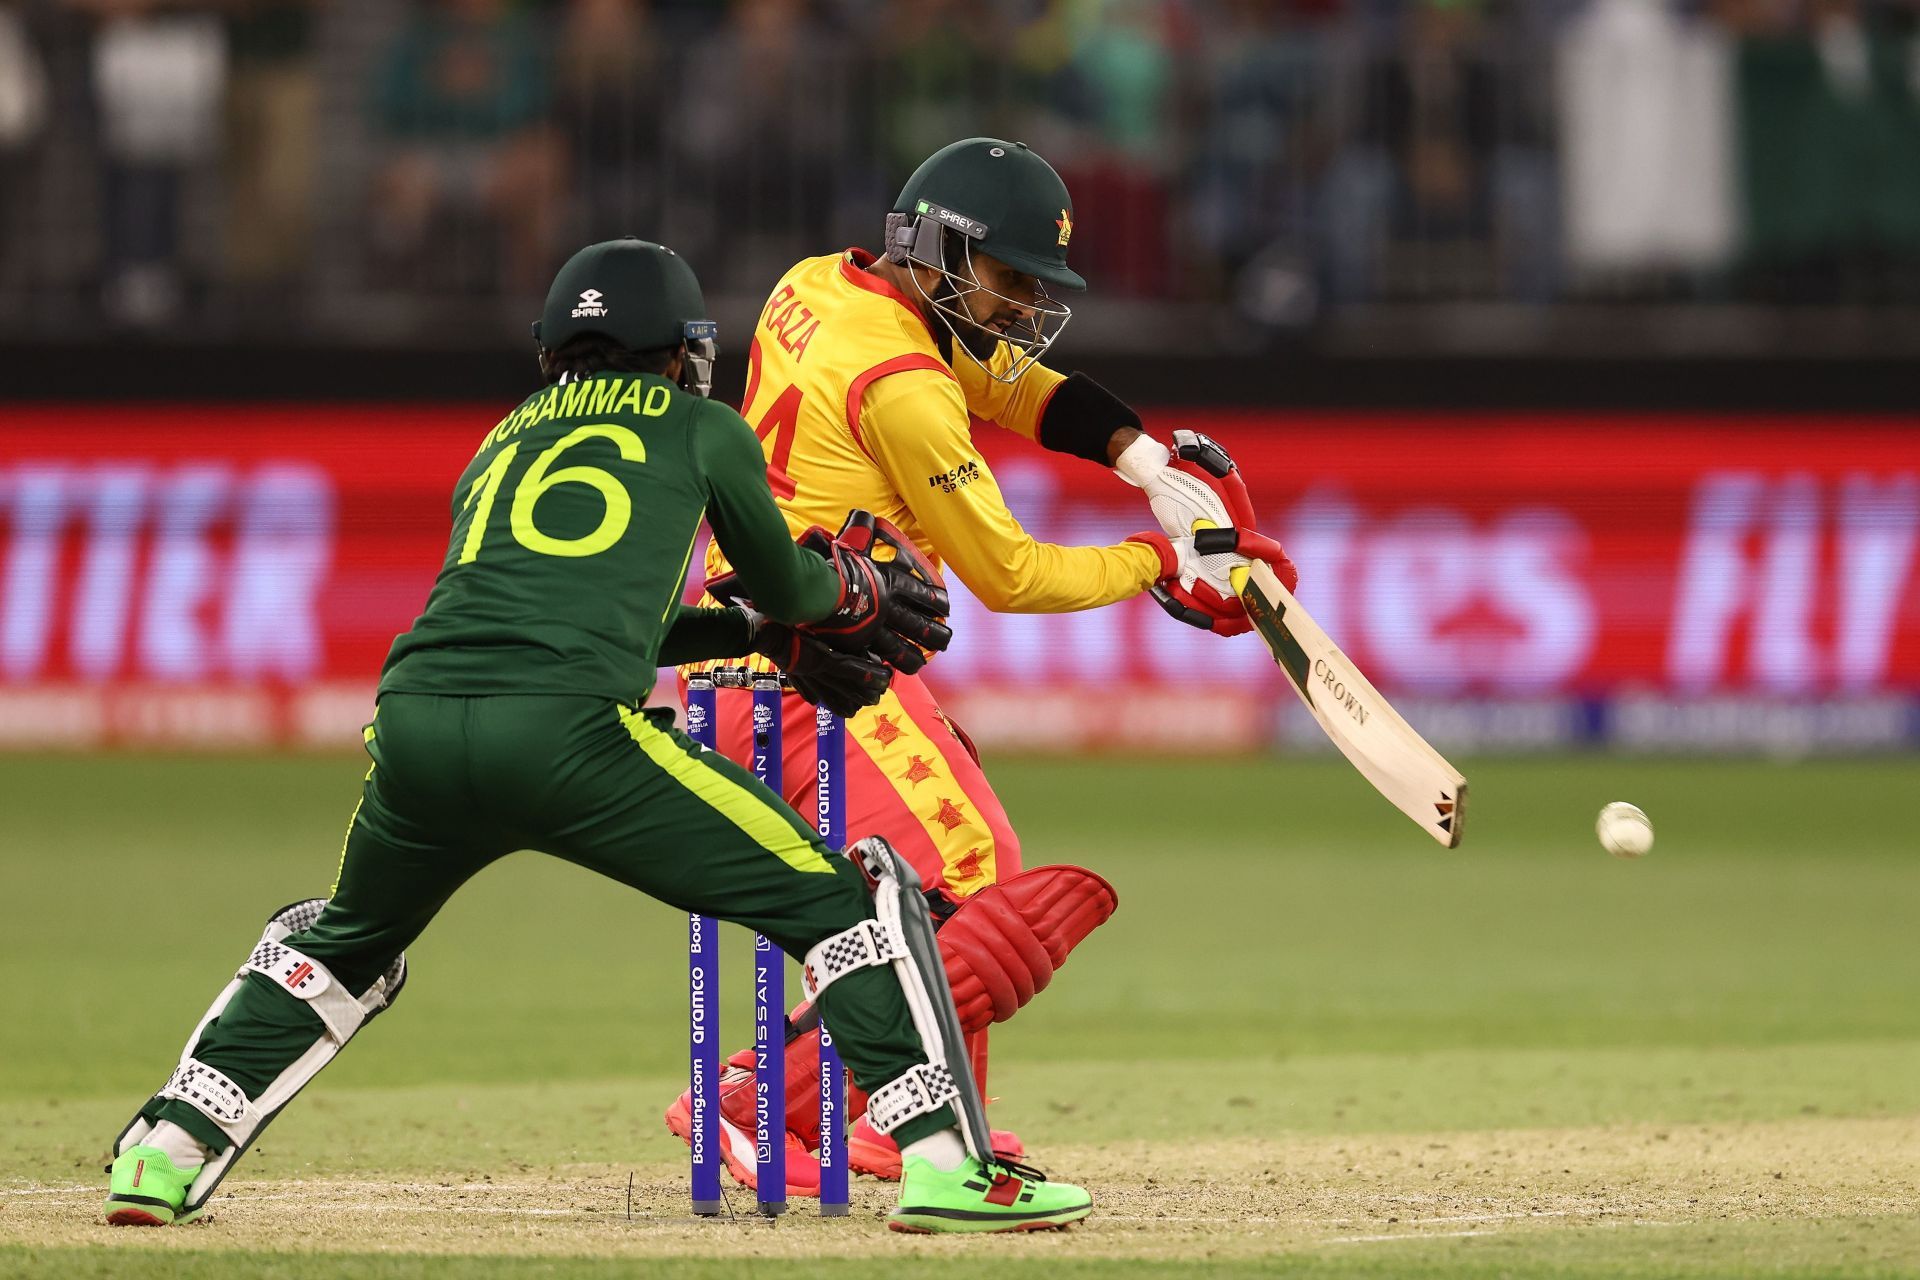 Sikandar Raza in action against Pakistan. (Image Credits: Getty)